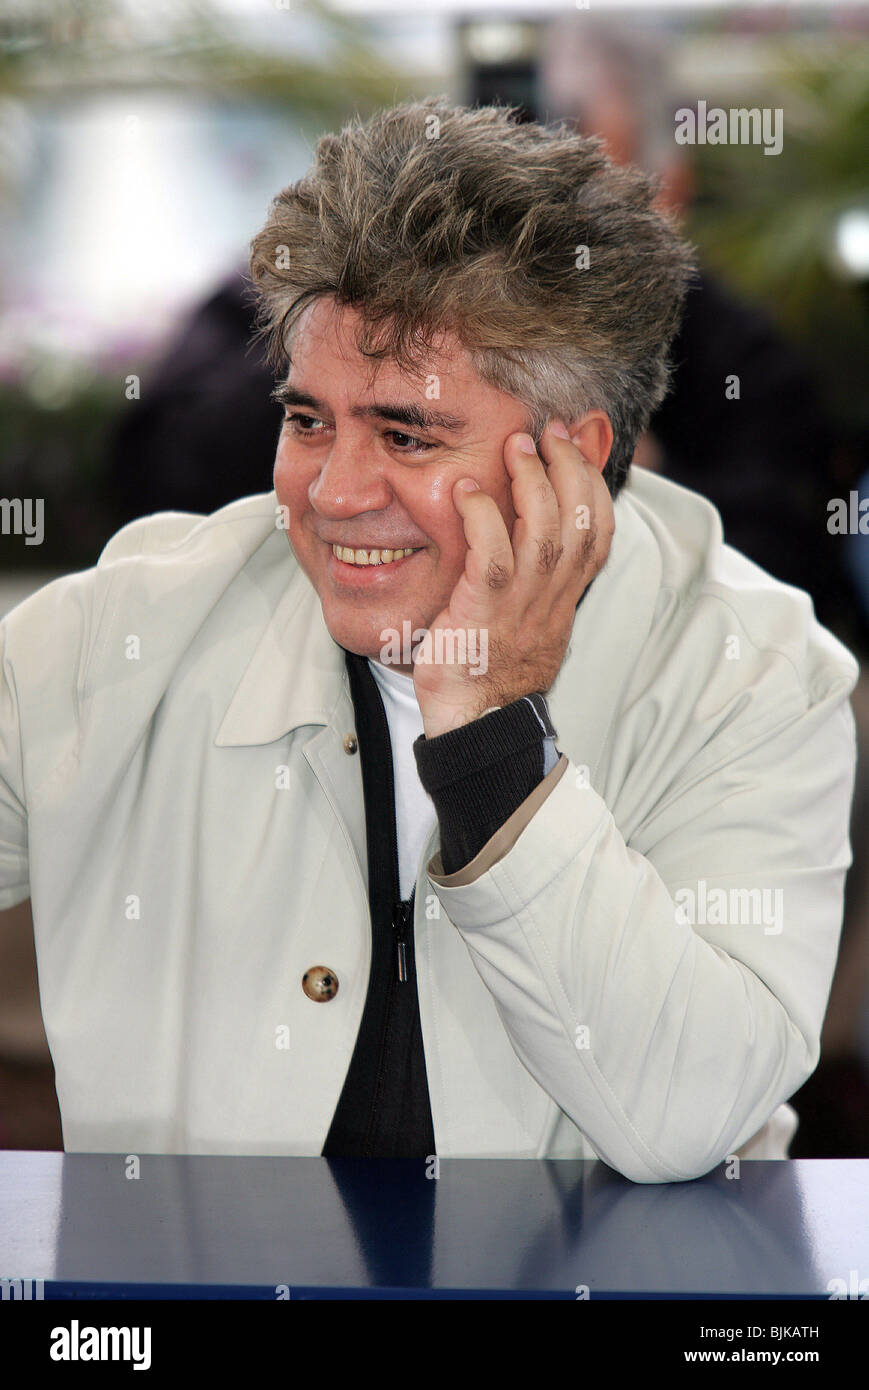 PEDRO ALMODOVAR CANNES FILM FESTIVAL 2004 CANNES FRANCE 12 May 2004 Stock Photo